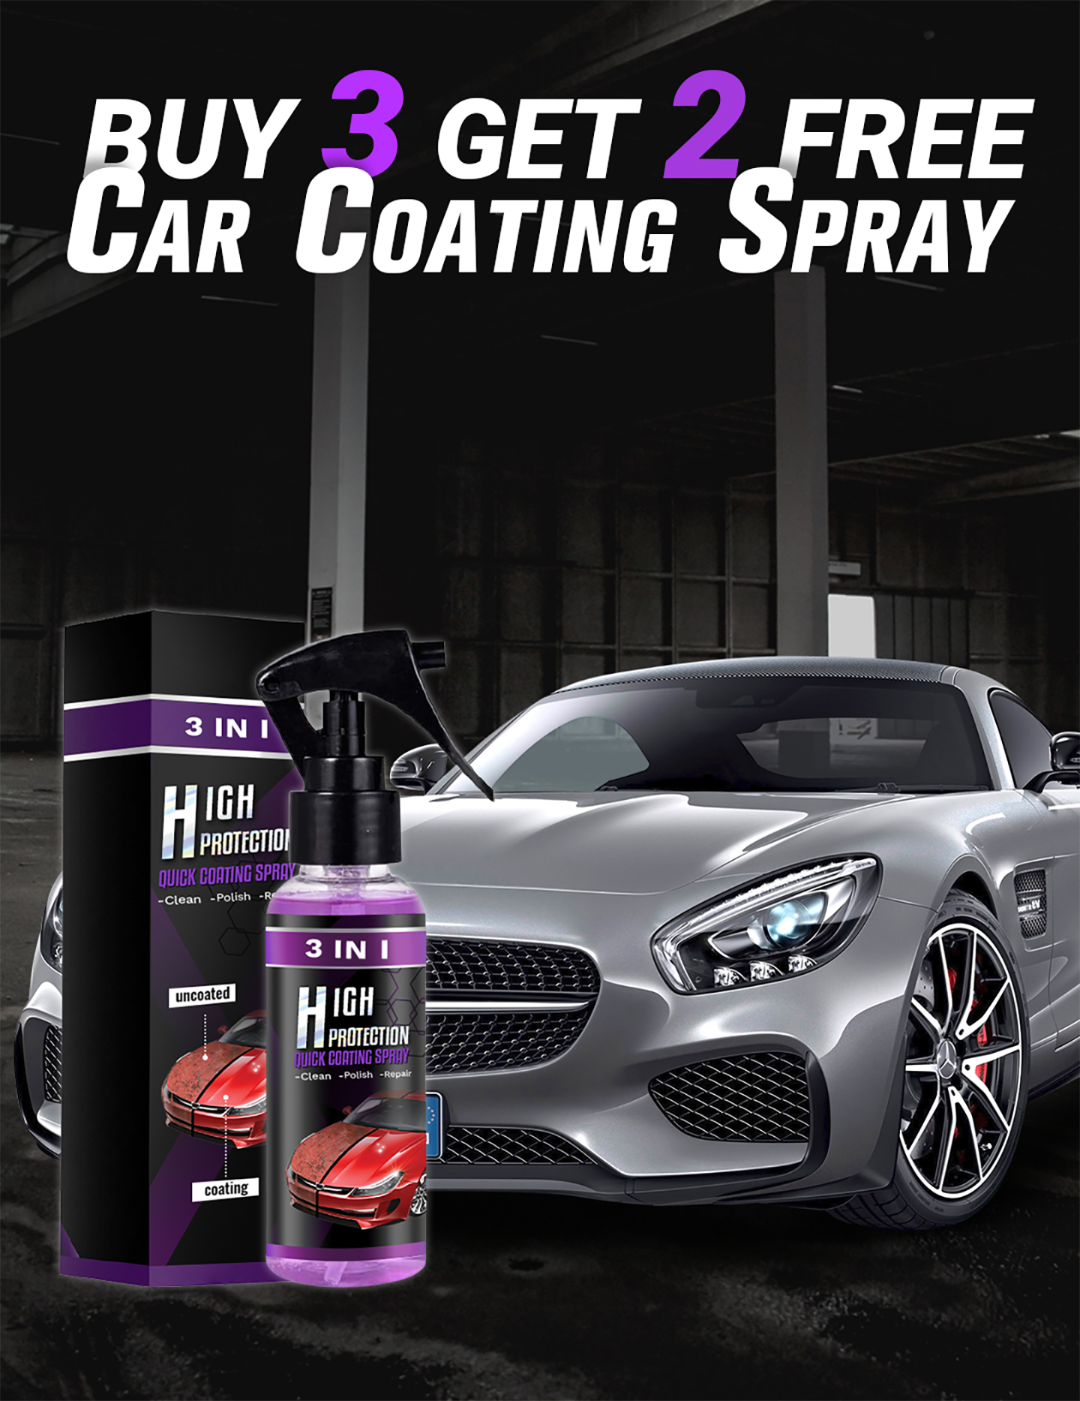 Lilingg 3 in 1 High Protection Quick Car Coating Spray, Lilingg 3 in 1 High  Protection Car Spray, Teepors High Protection, Vrsgs Car Wax, Newbeeoo Car